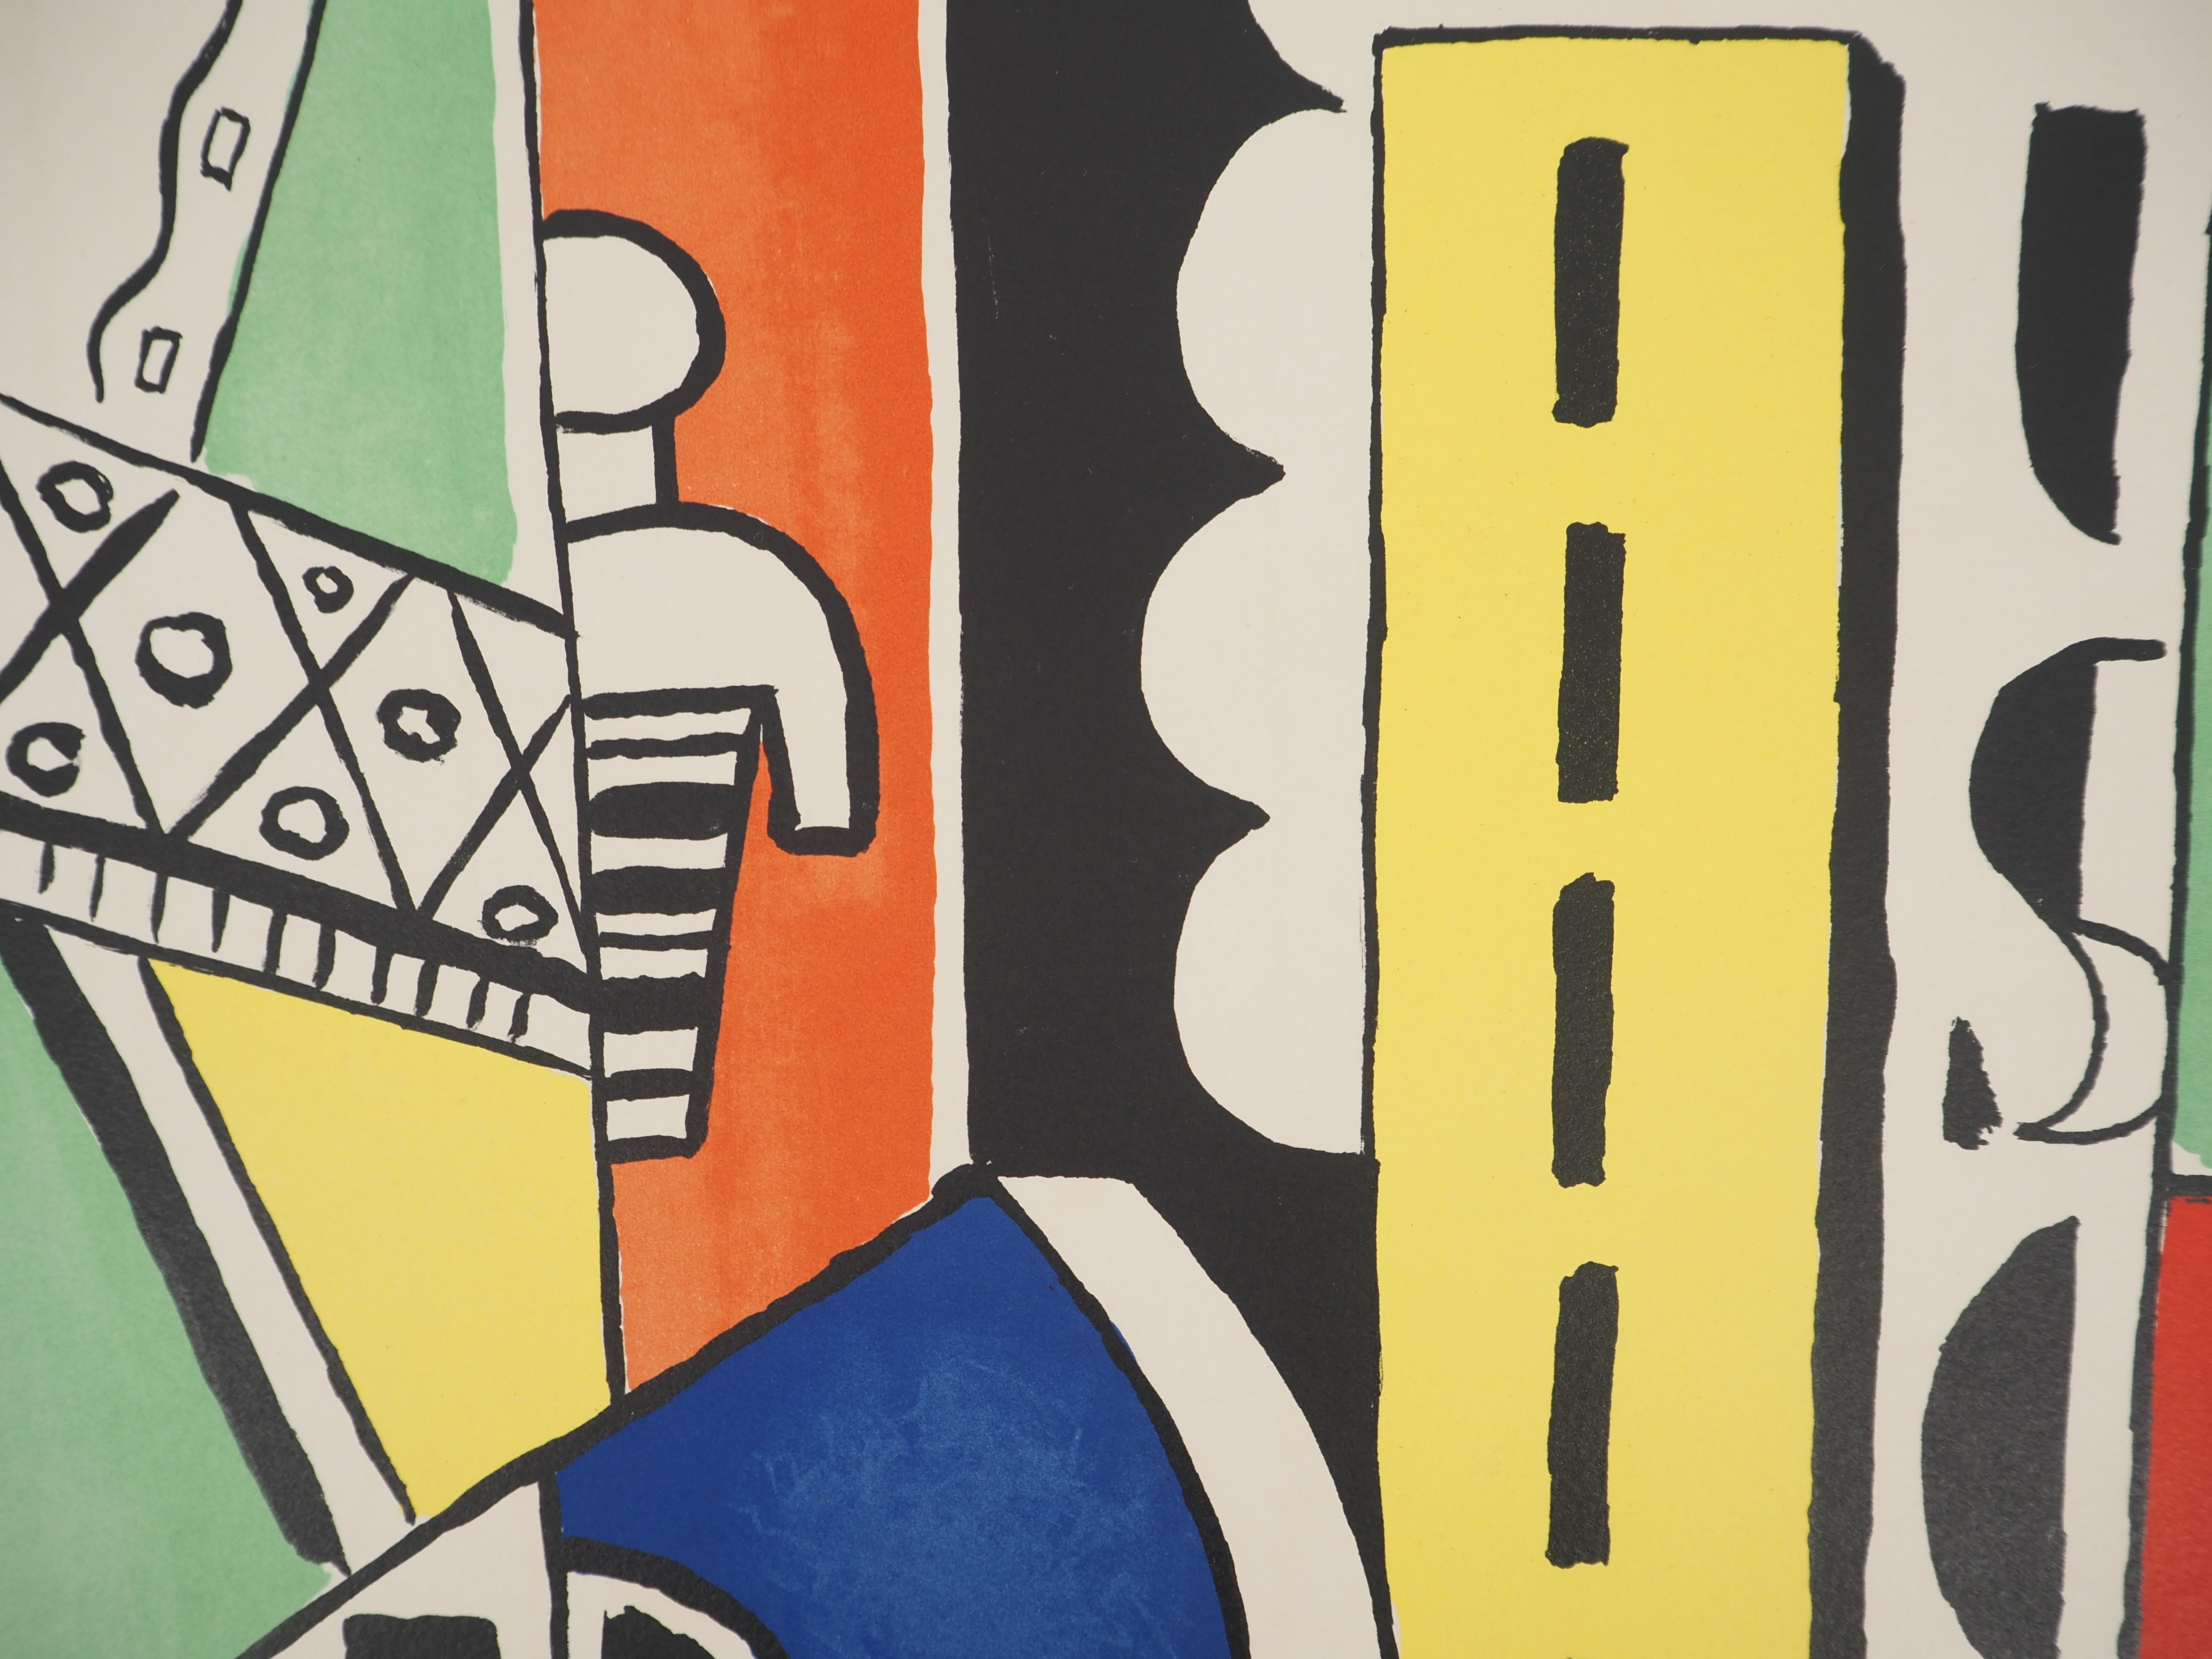 Fernand Léger
Man in the city, 1959

Original lithograph (Atelier Mourlot)
Signed with the artist's stamp
Limited to 180 copies (Here numbered 160)
On Arches vellum  66 x 50.5 cm (c. 25.9 x 19.6 in)

REFERENCES :
- Catalog raisonne Saphire p.